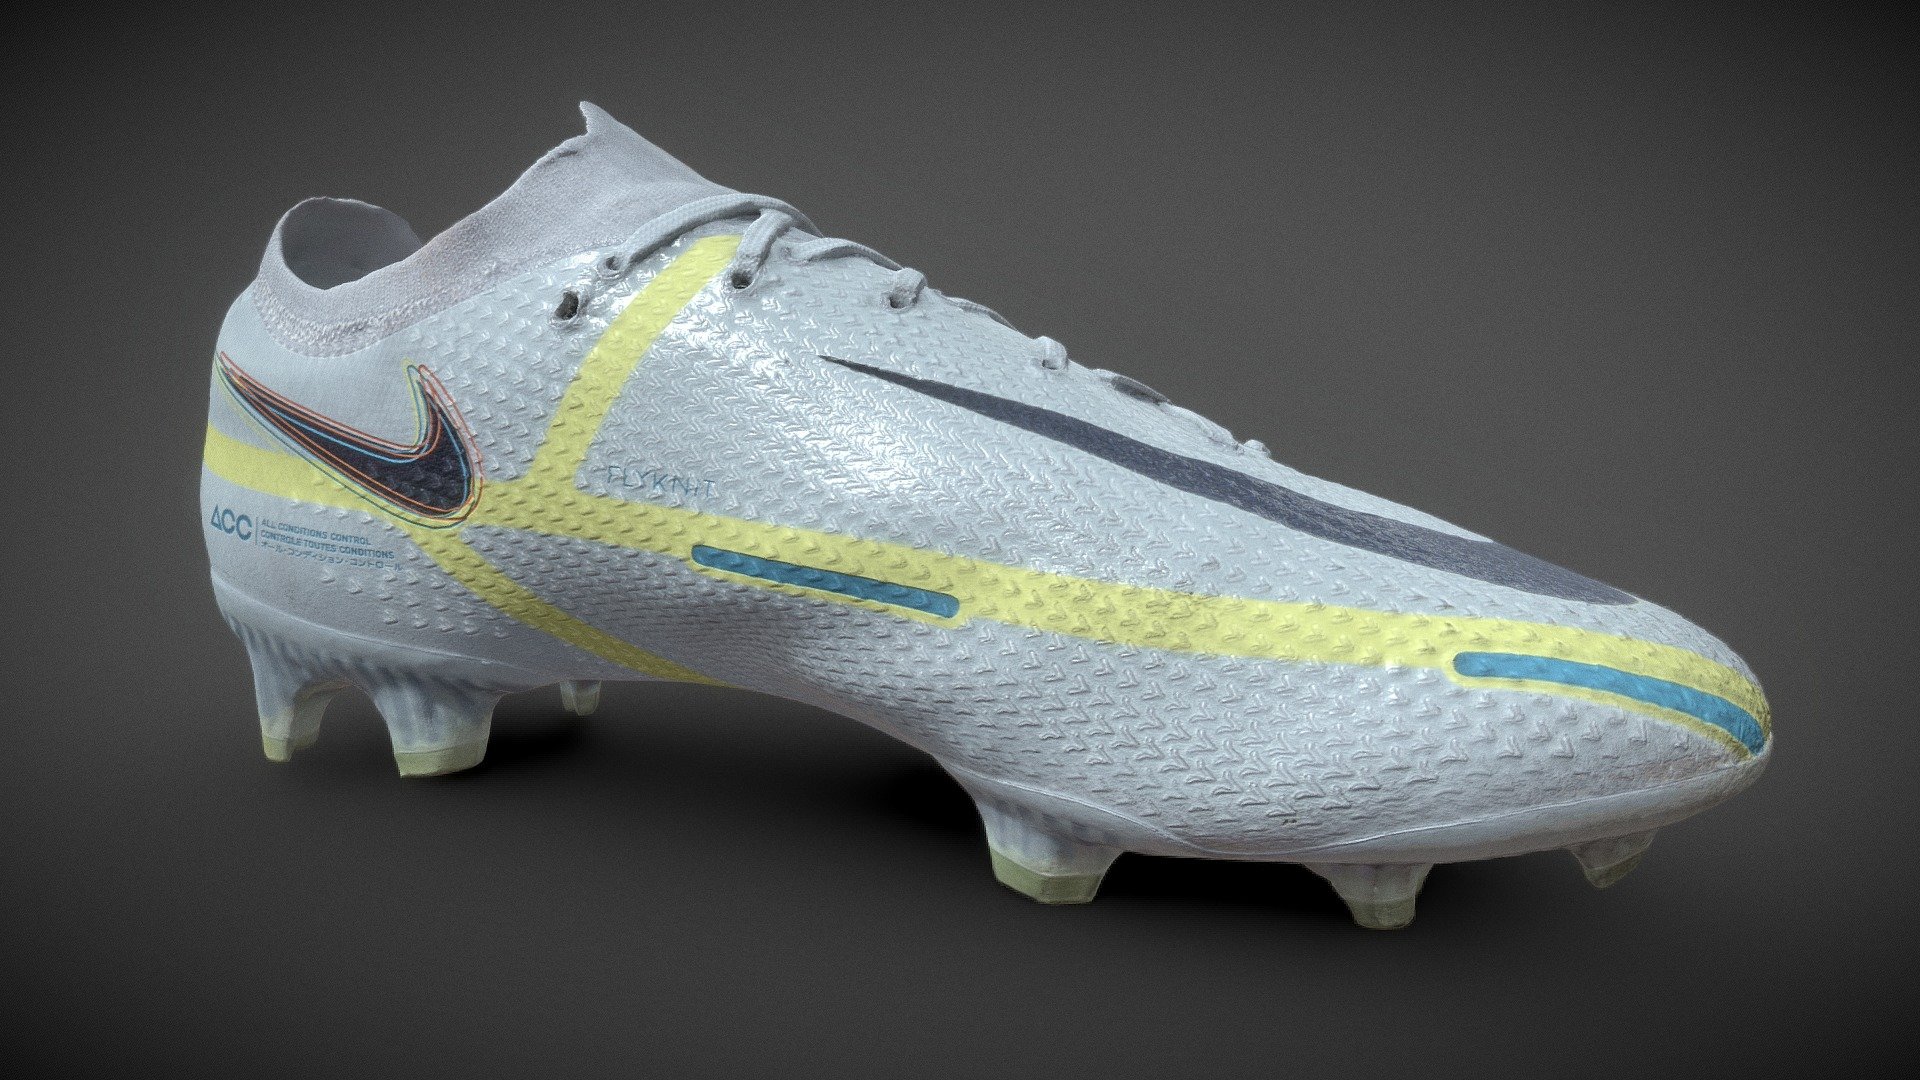 Nike Phantom Football Shoes Photogrammetry scan for the Nike Never Settle ad campain.
250k triangles model with 8K textures 3d model